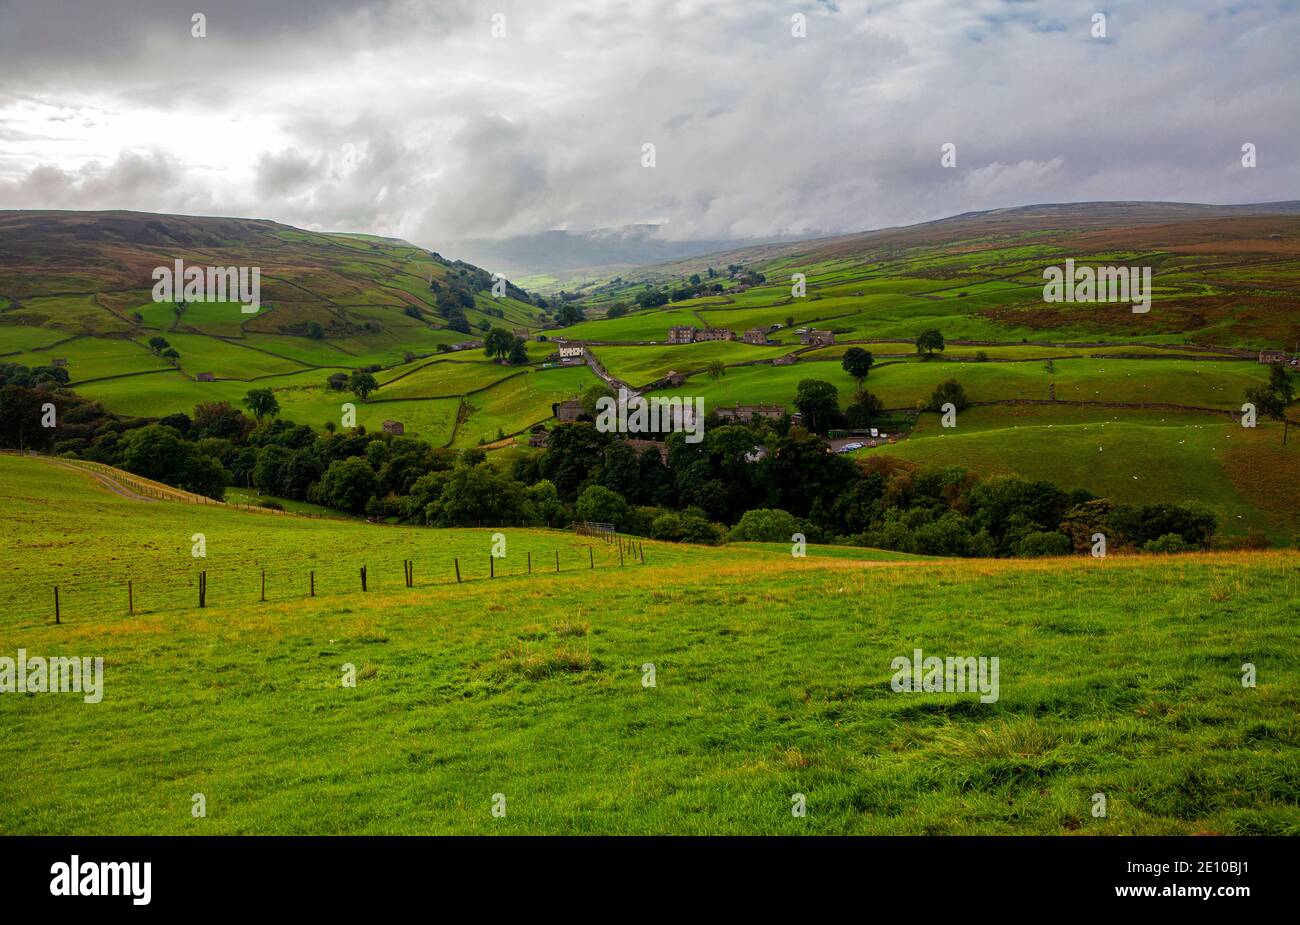 Swaledale; one of the northernmost Dales in the Yorkshire Dales National Park, along the Pennine Way. Stock Photo